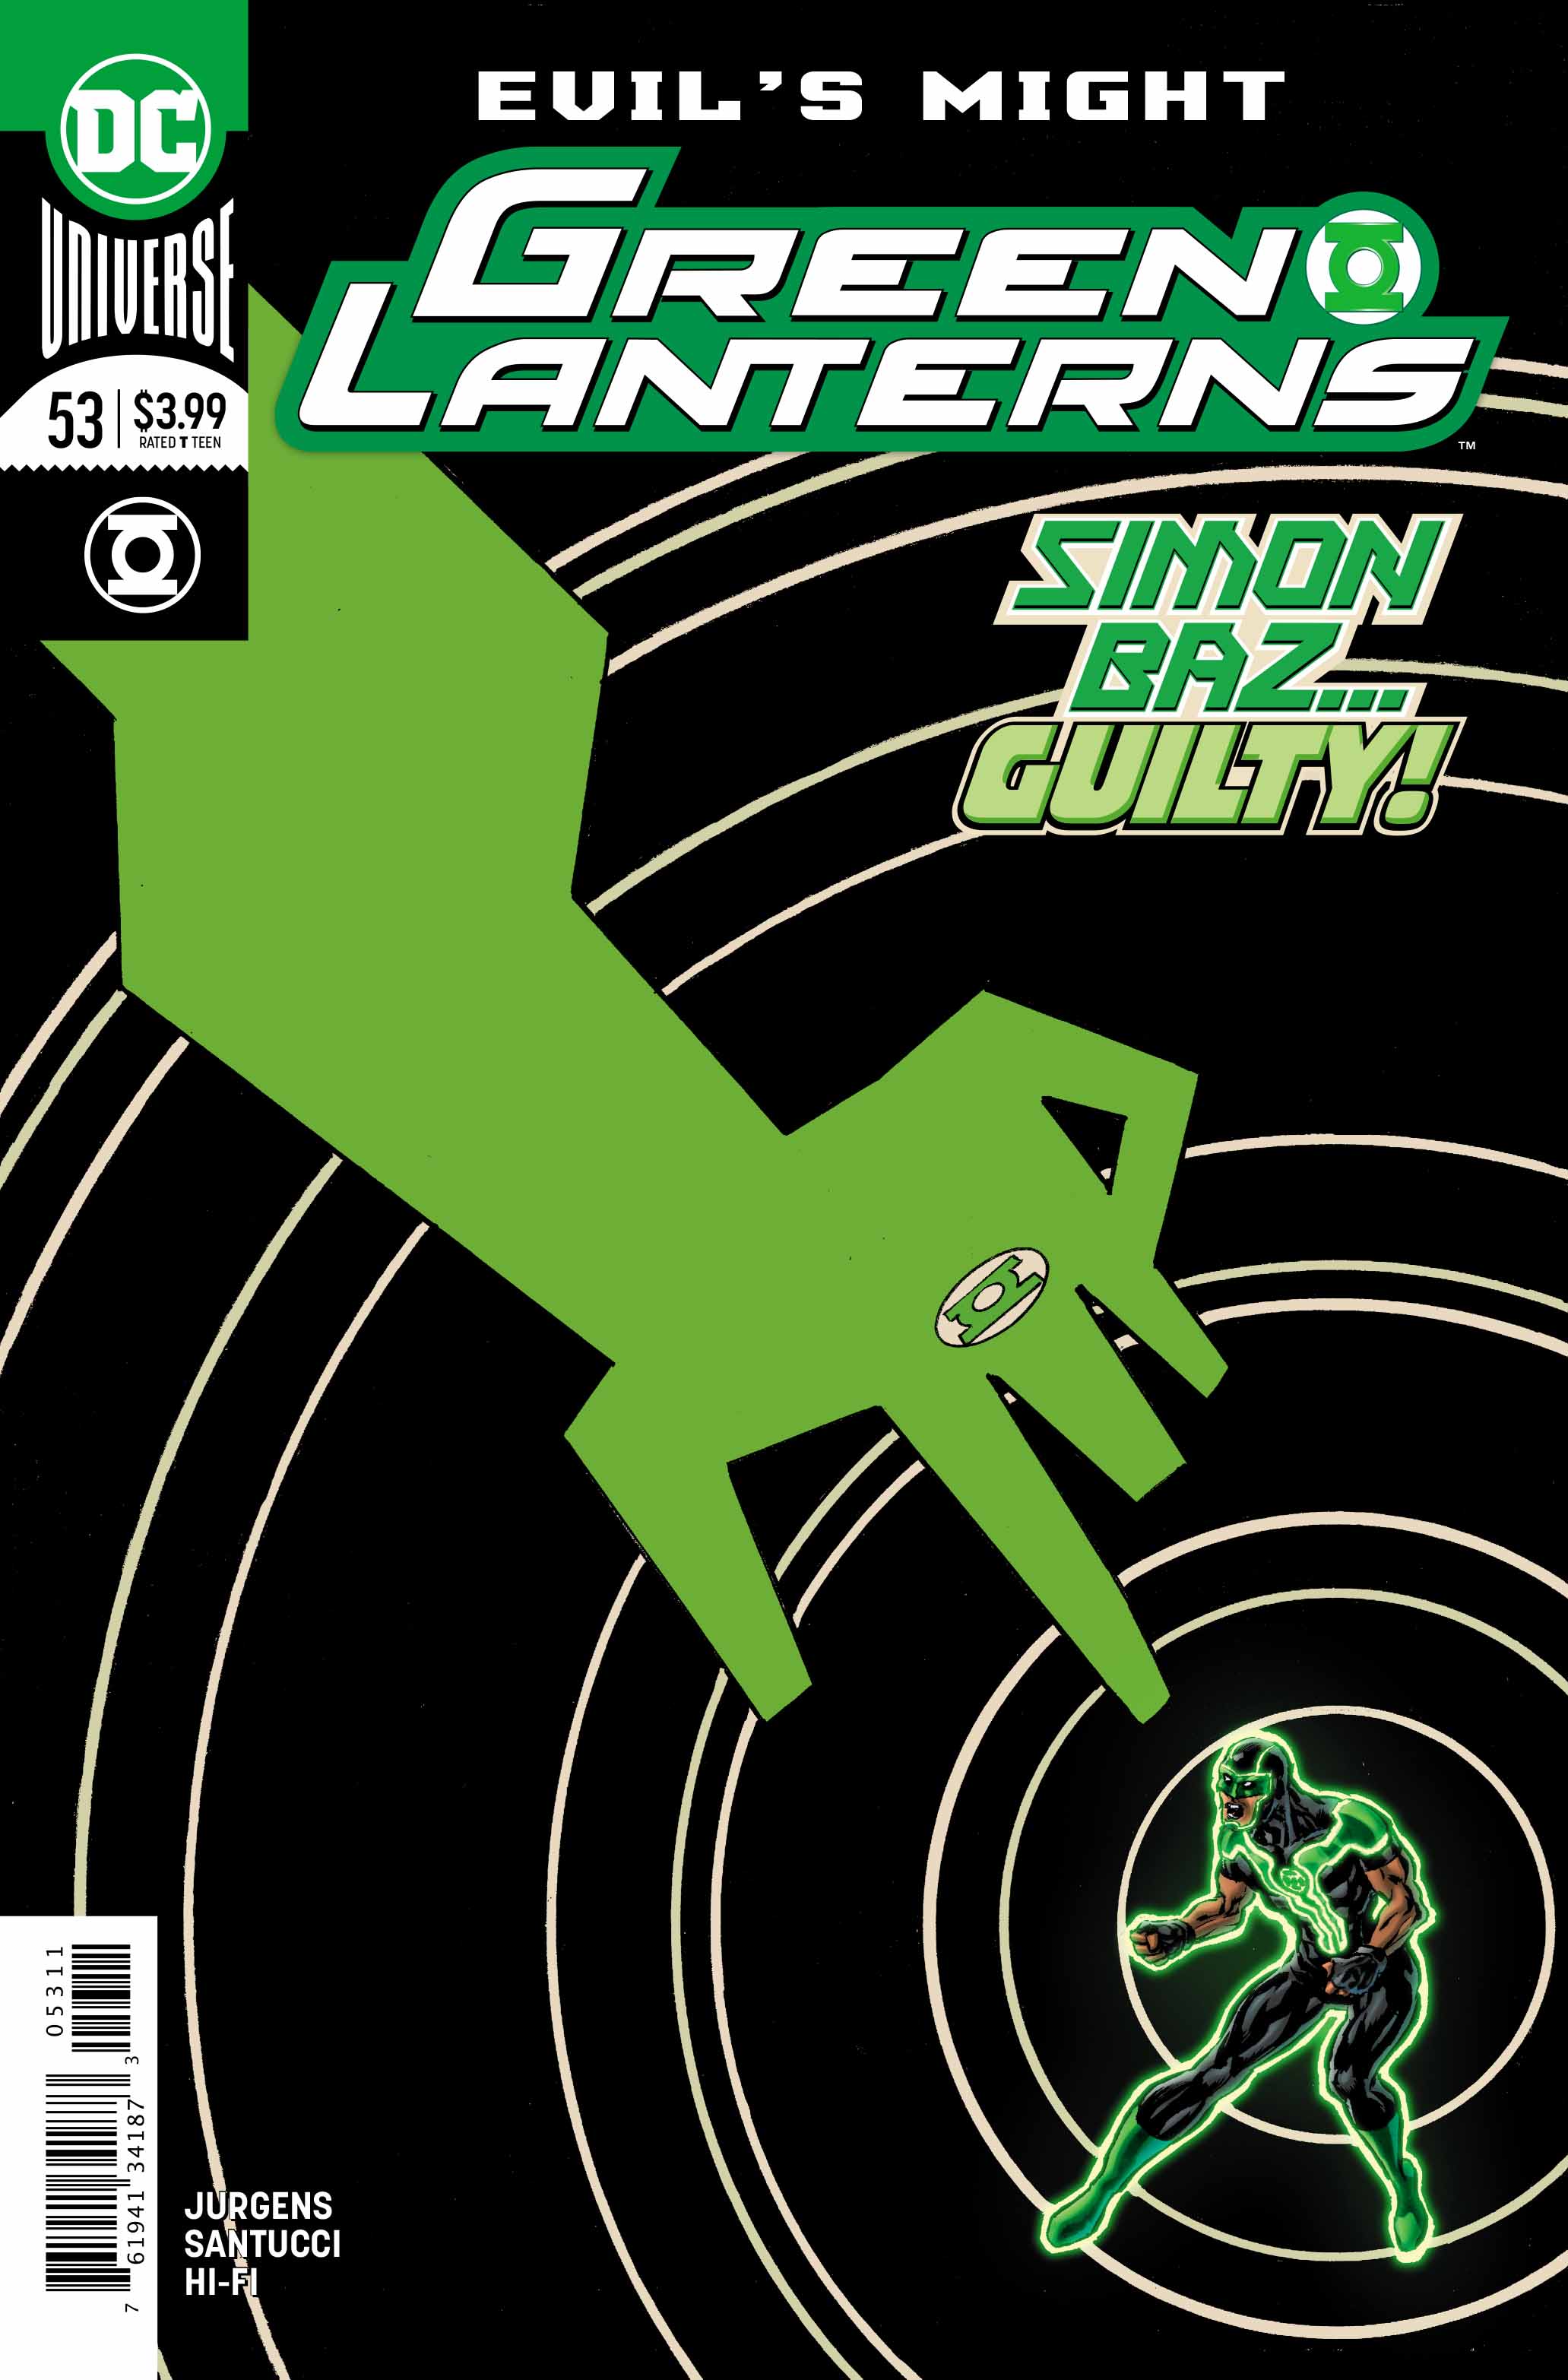 Green Lanterns #53 review: An okay issue that begins to show this arc's wasted potential